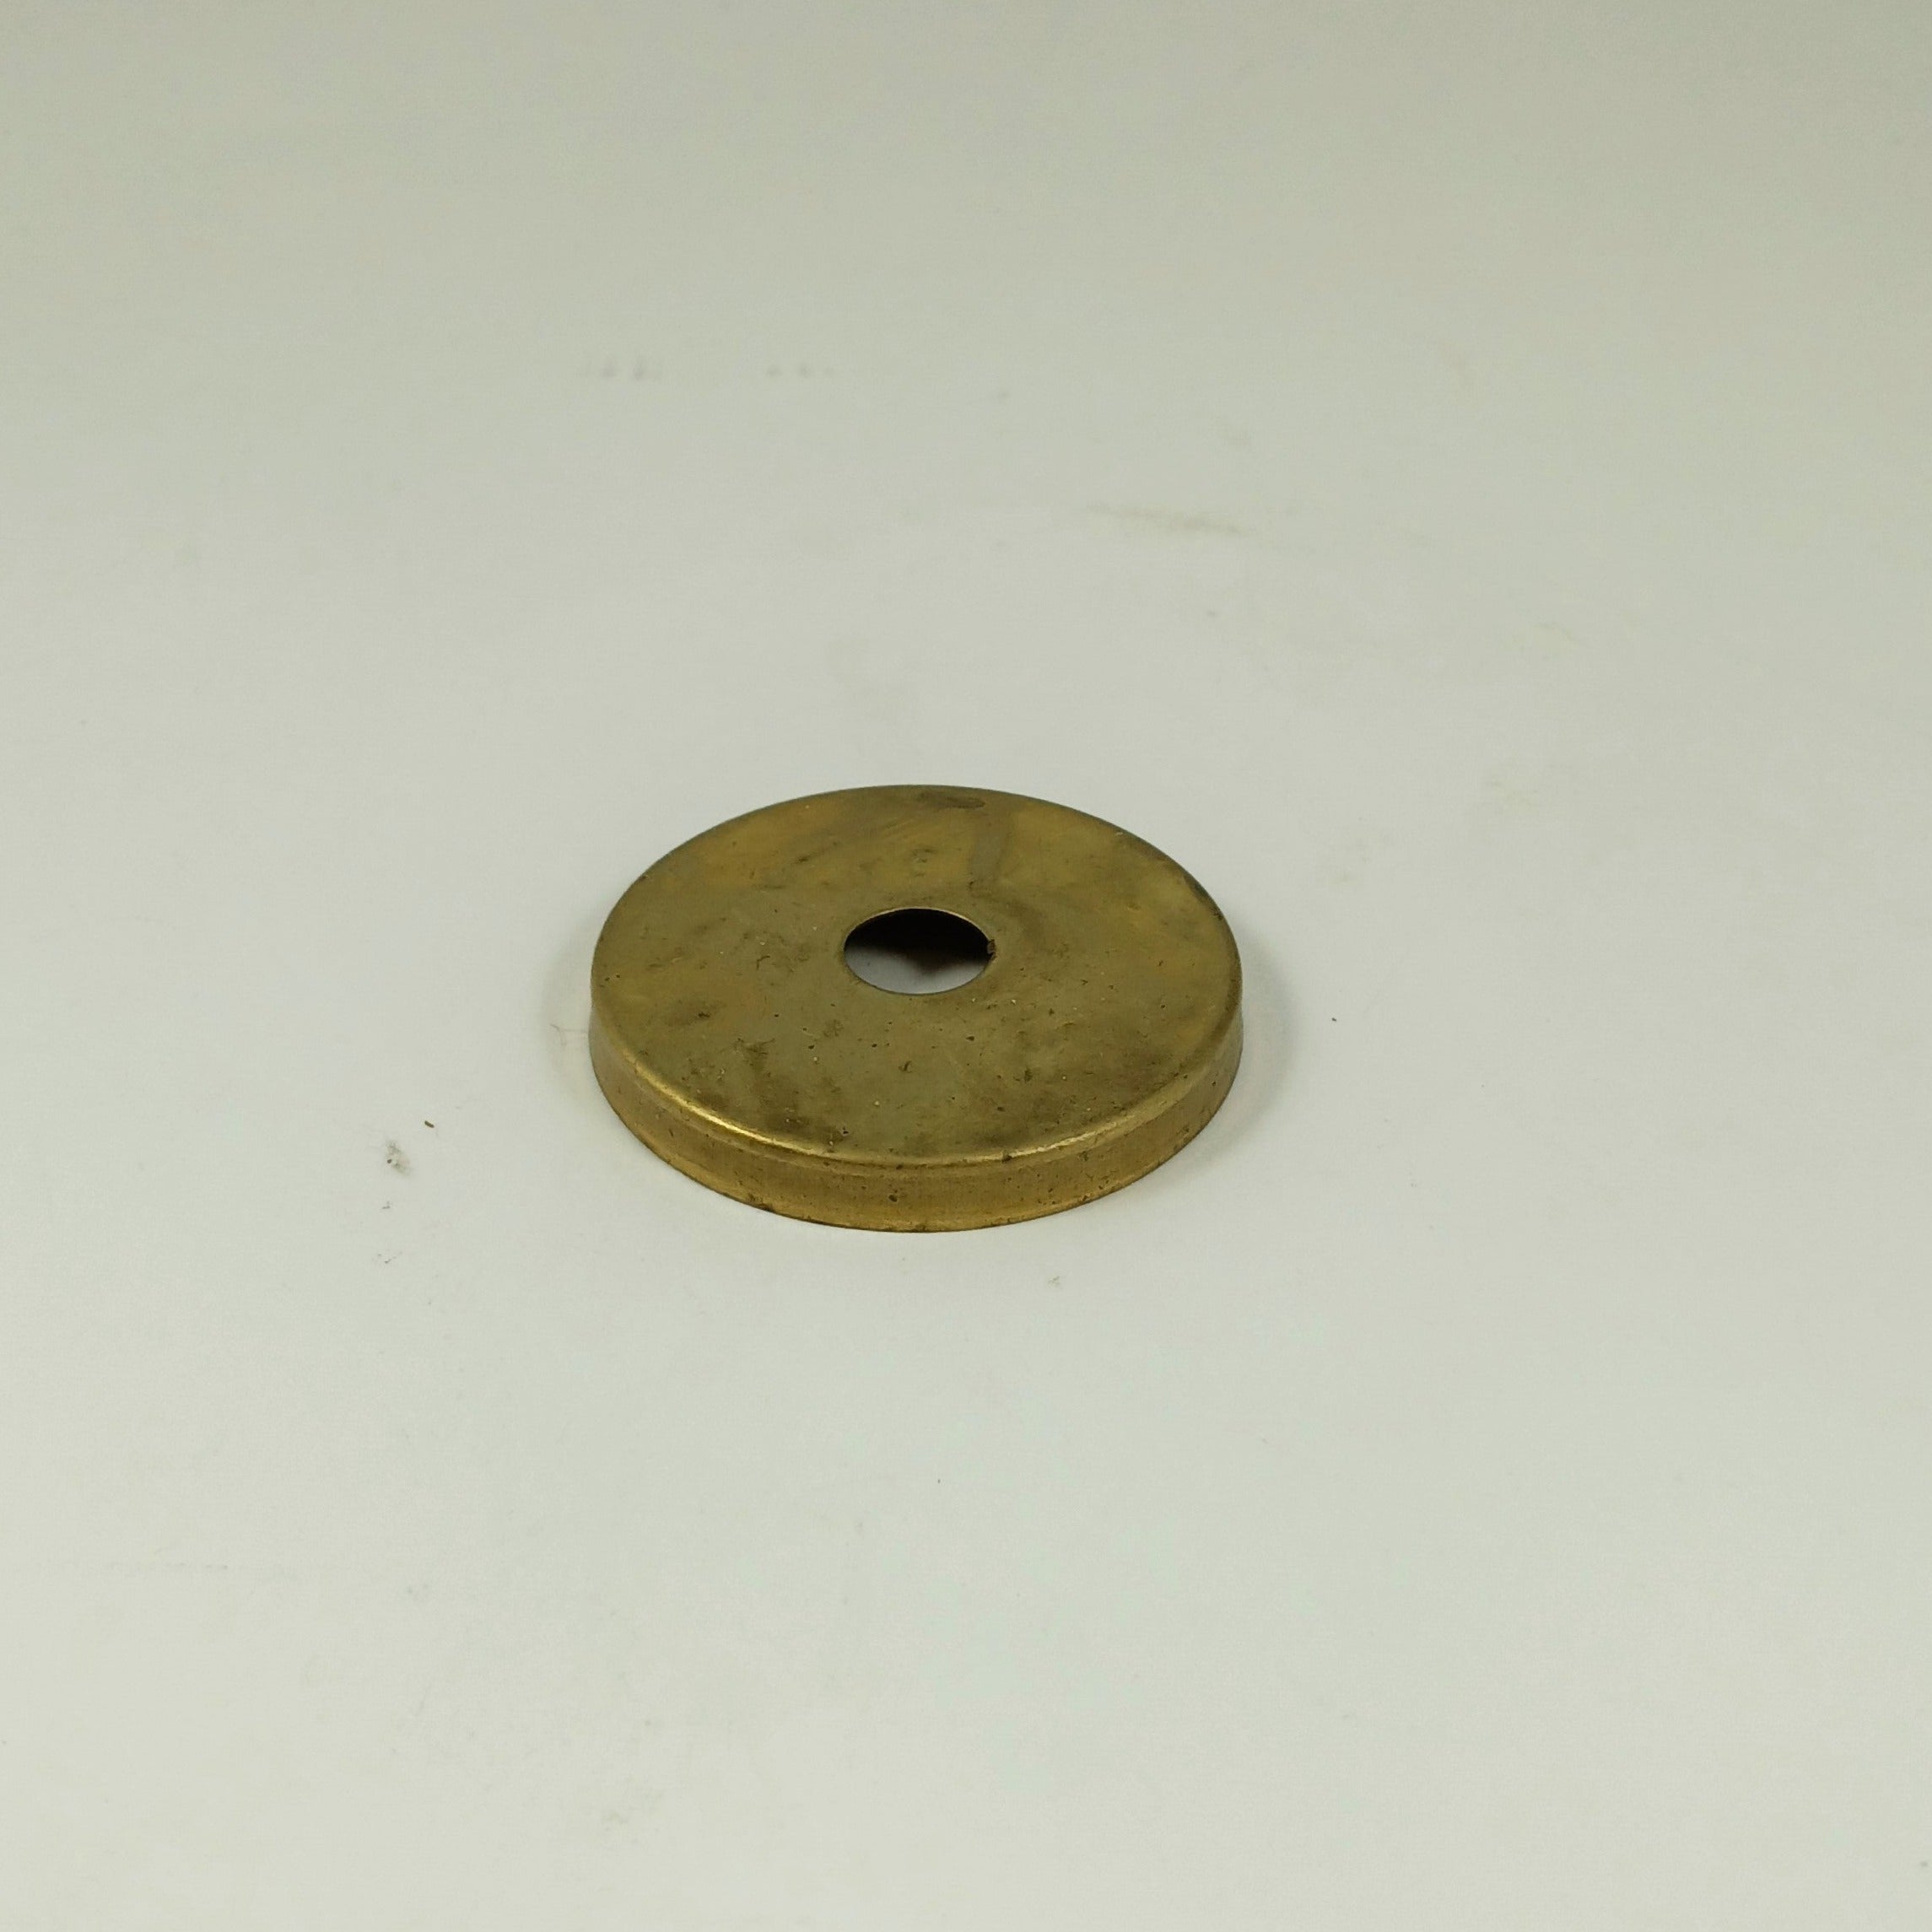 2-1/2" Round Flat Brass Plates - Unfinished Brass - Check Plate